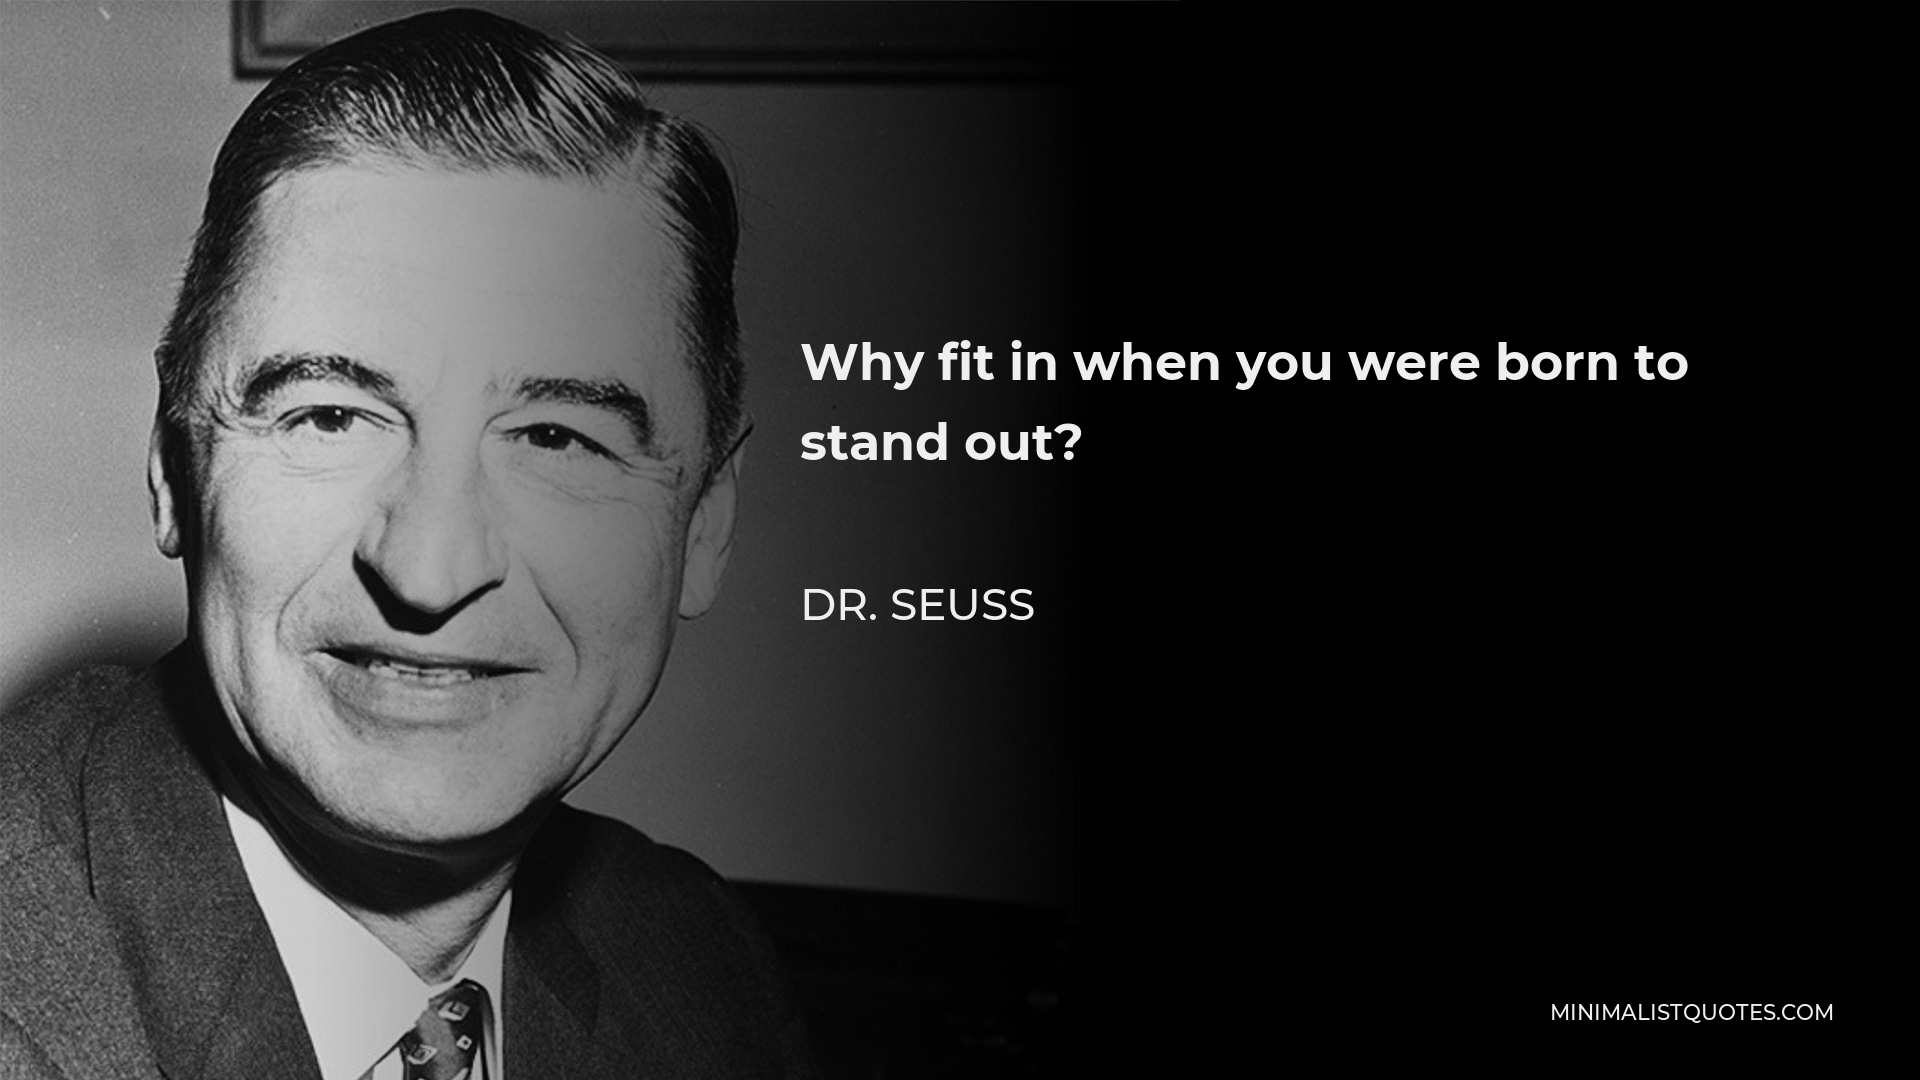 Dr. Seuss Quote - Why fit in when you were born to stand out?